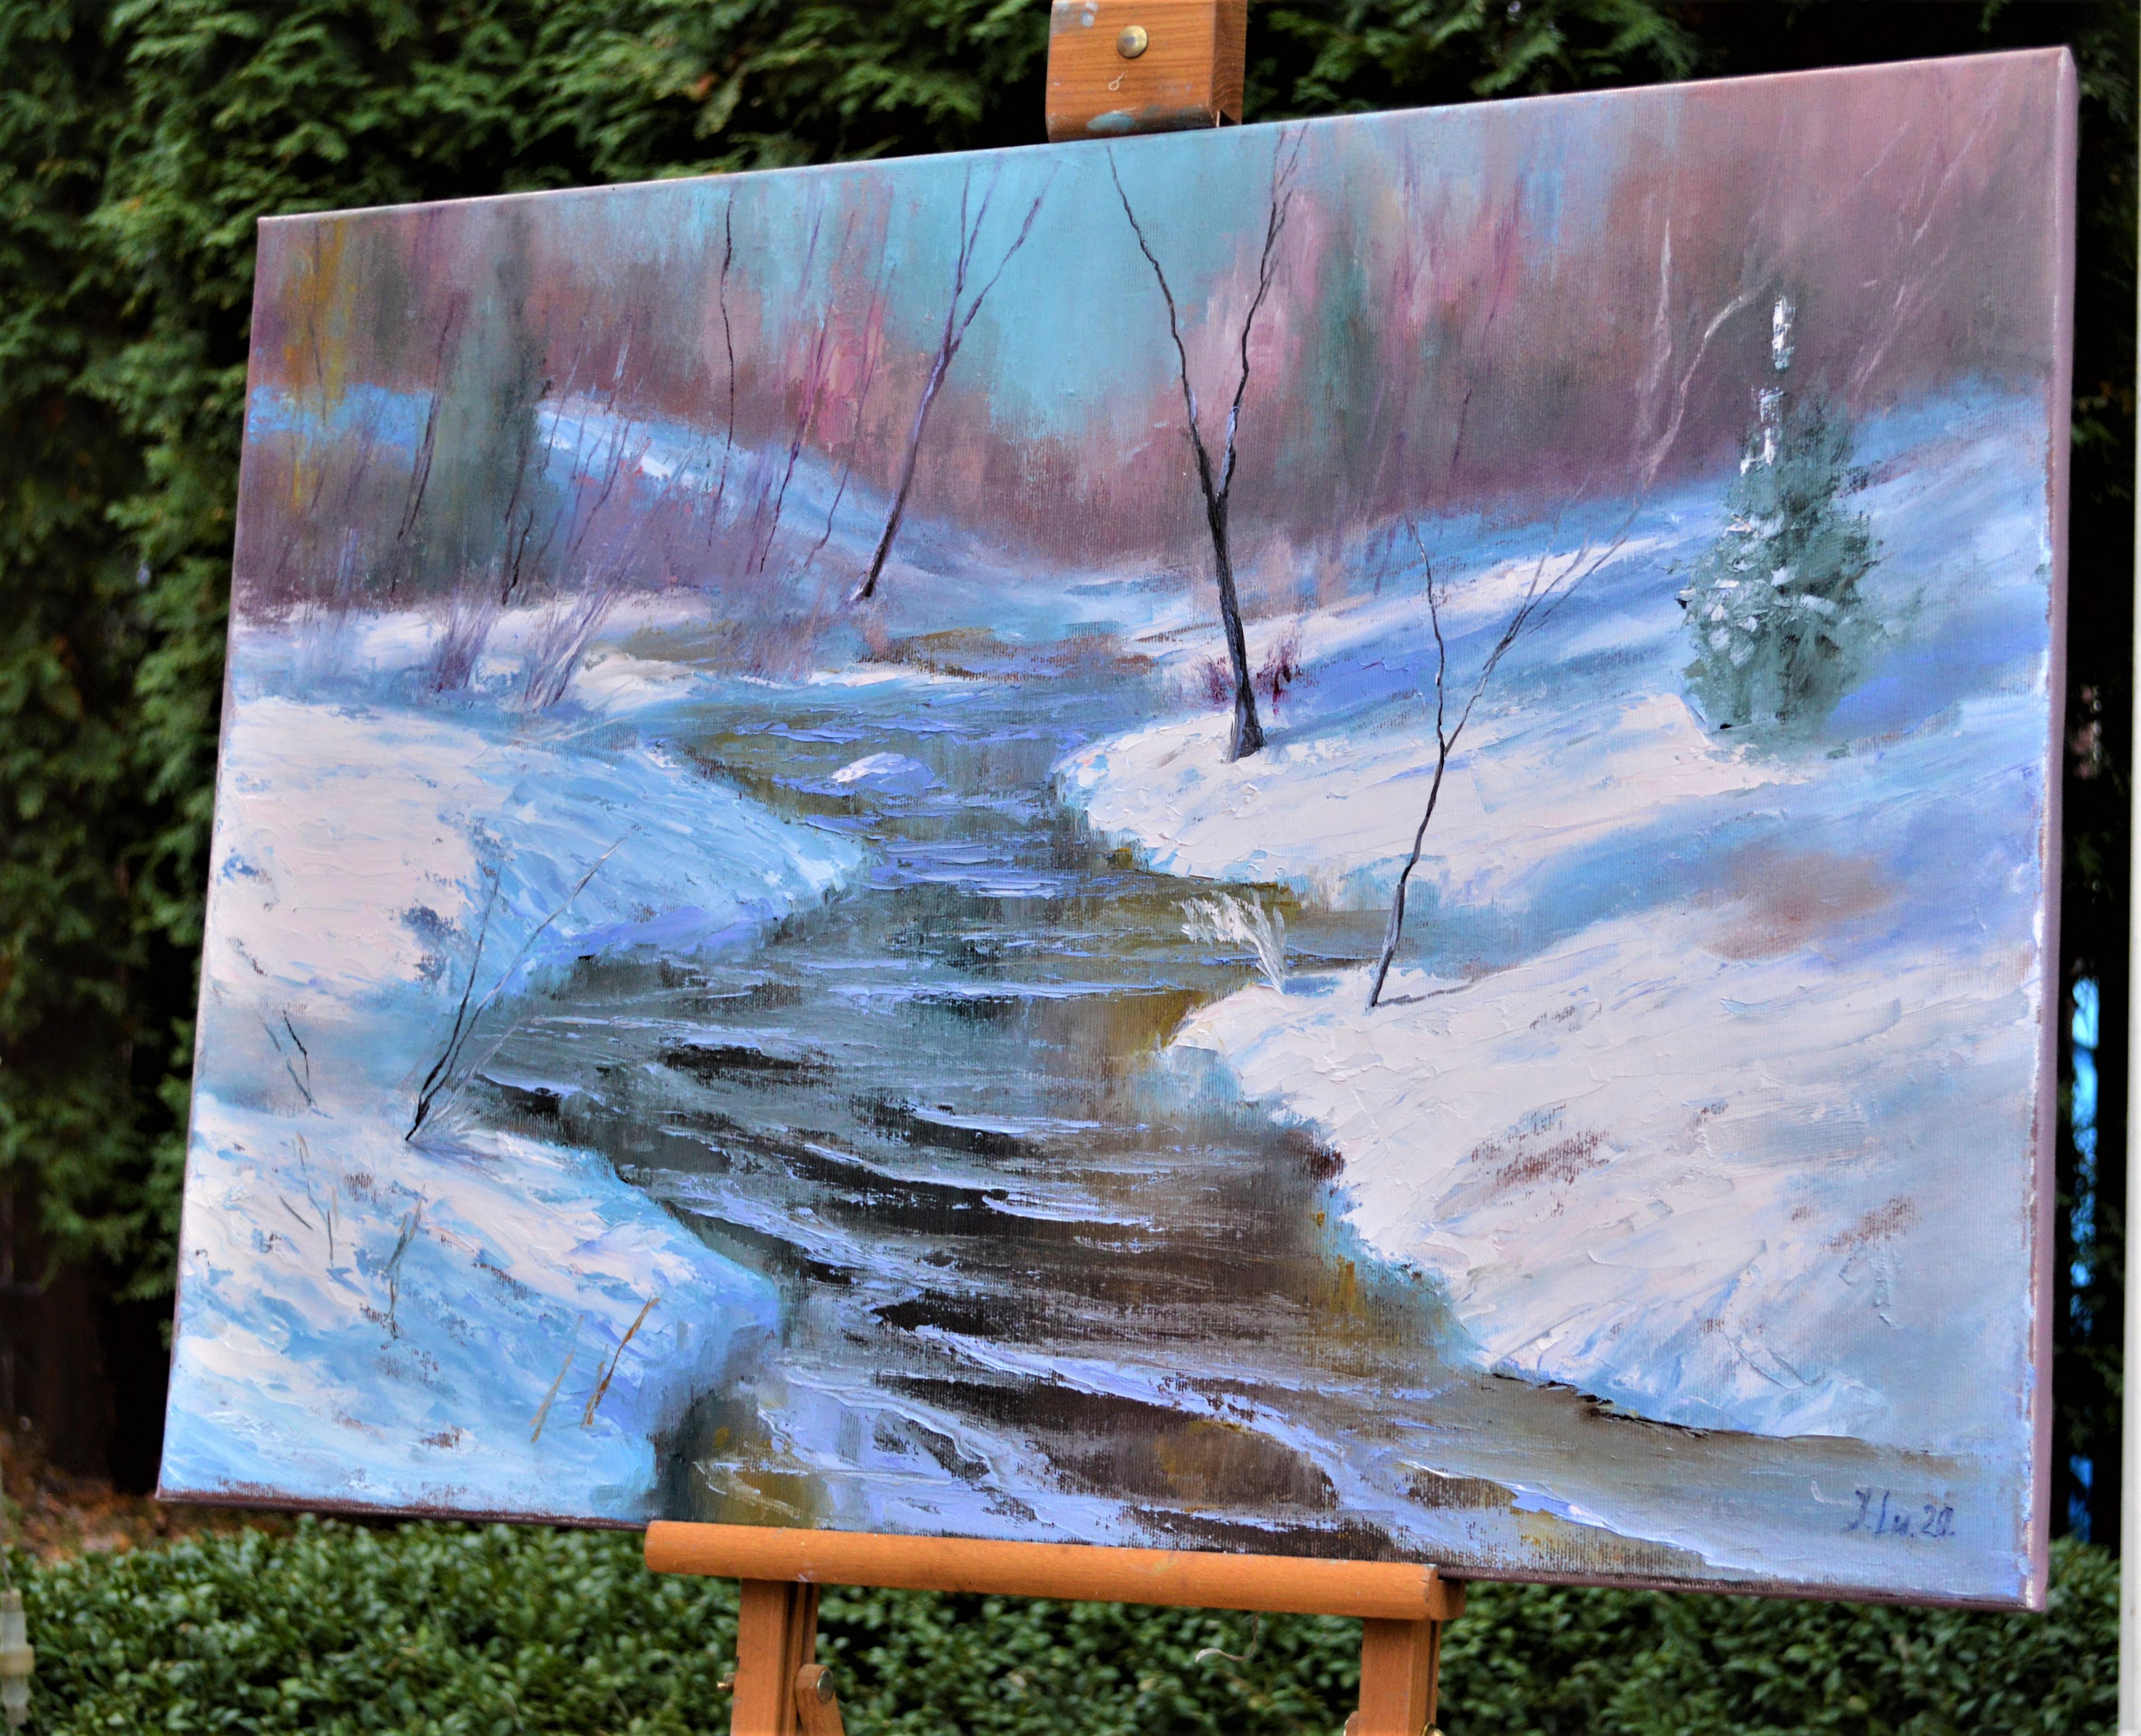 In this piece, I've poured my soul into capturing the raw, serene beauty of nature's embrace during the winter. I've blended expressionism with touches of realism to evoke the stillness and mystery of a forest draped in snow, with an icy river